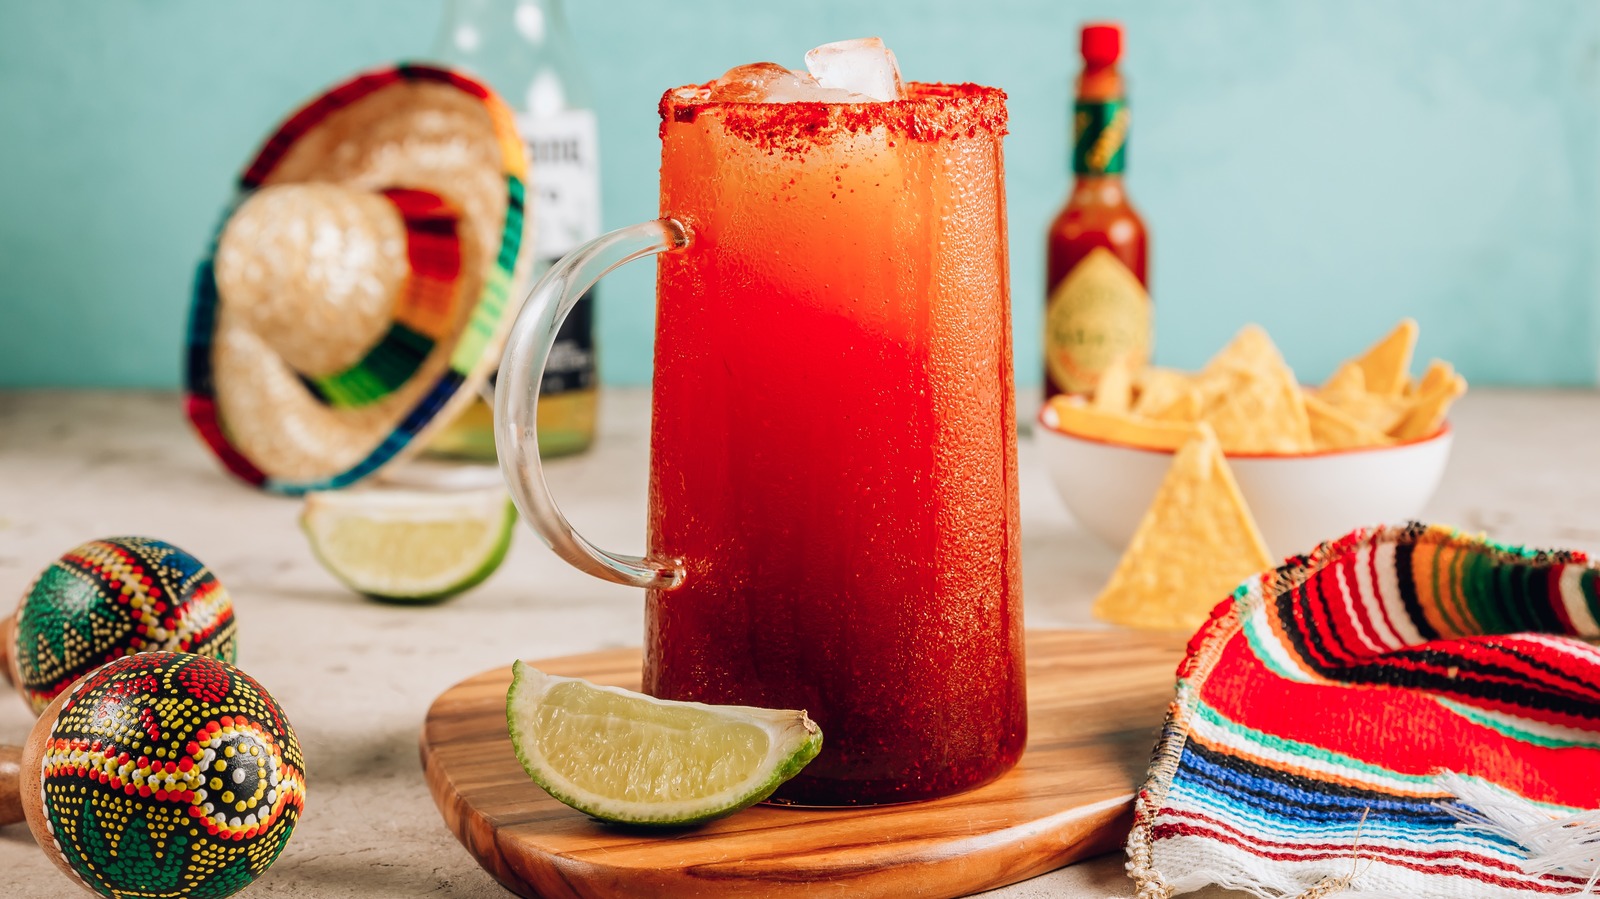 https://www.tastingtable.com/img/gallery/the-flavorful-ingredient-swap-you-can-make-for-your-next-michelada/l-intro-1687280156.jpg